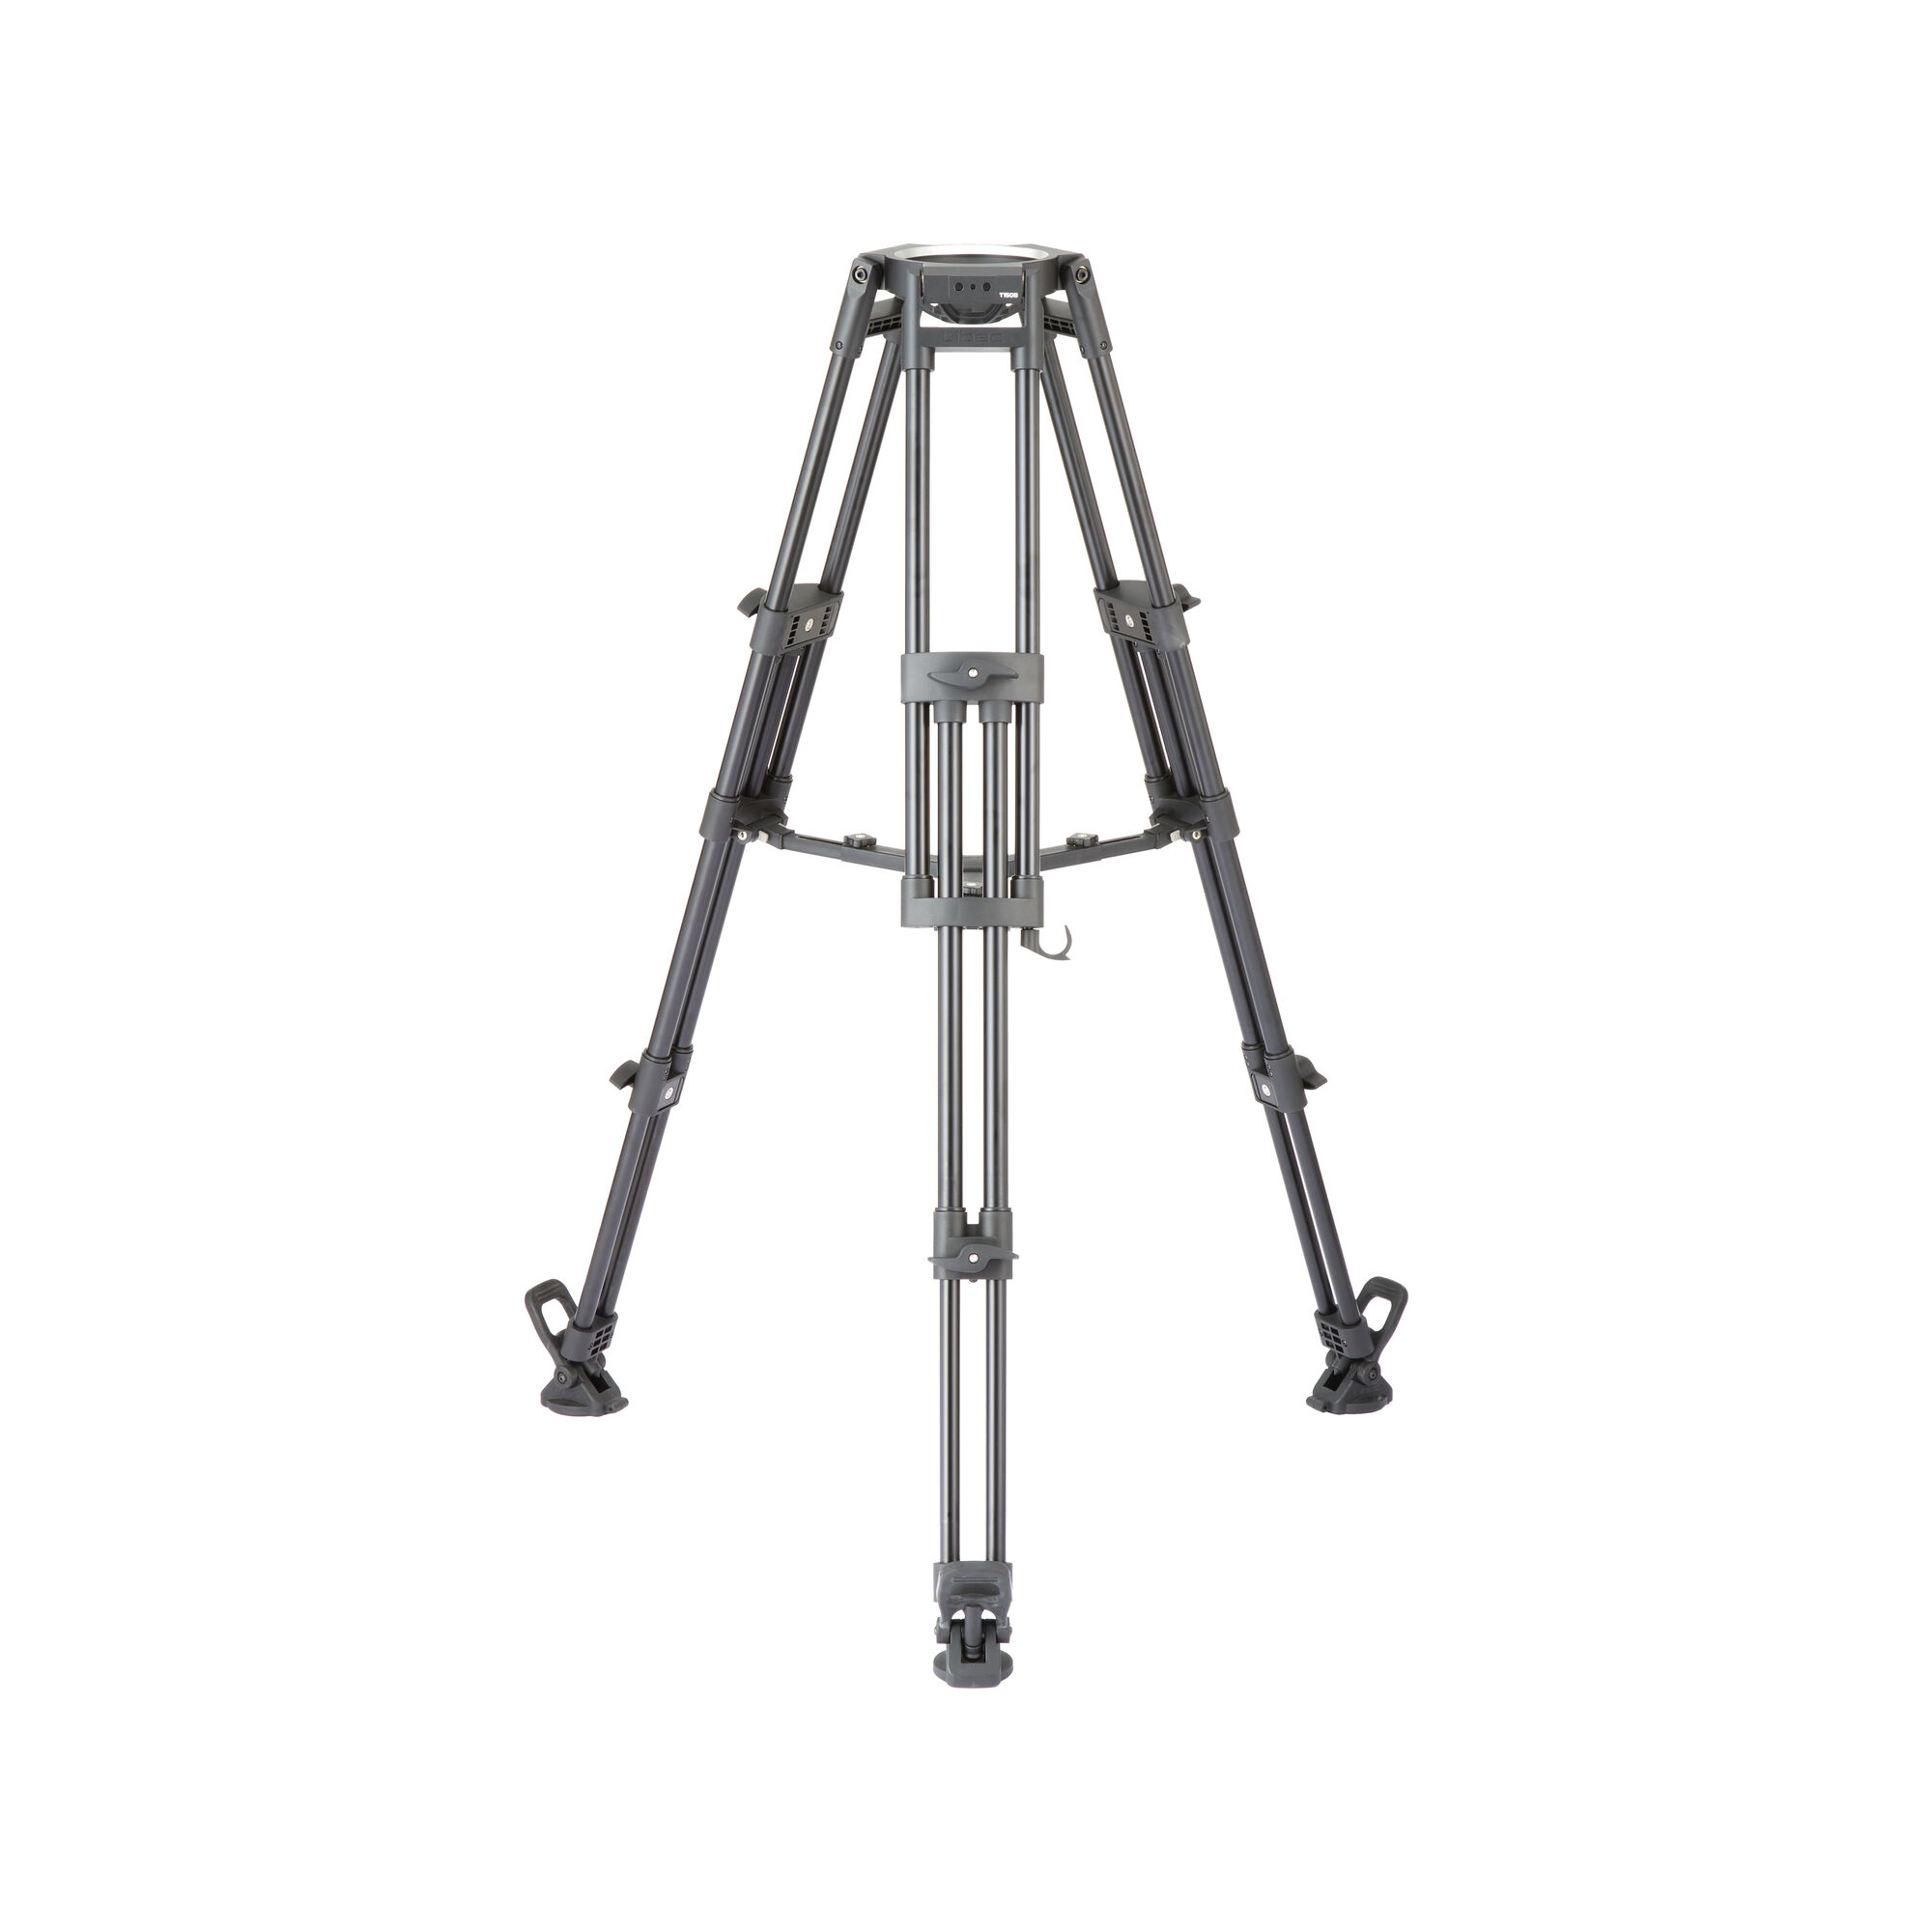 Libec 2stage heavy duty carbon fiber tripod with 150mm bowl